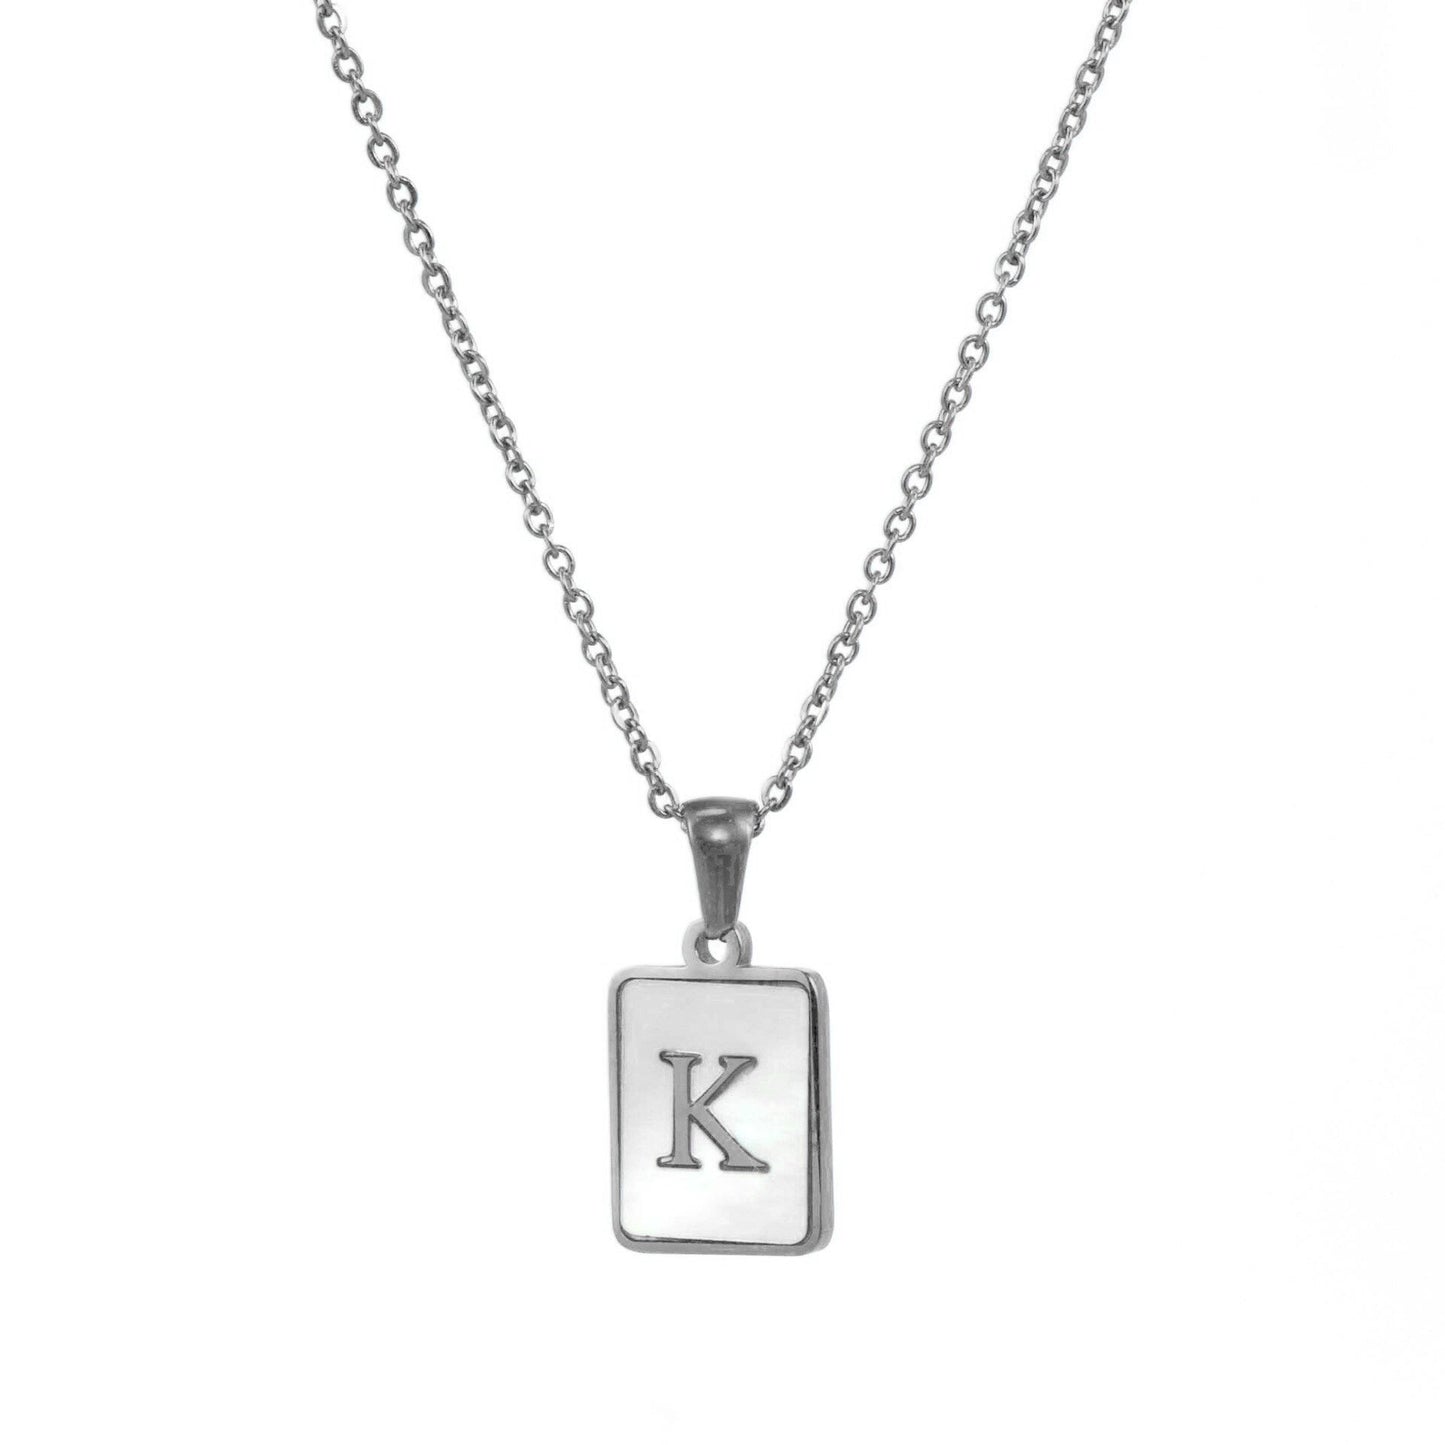 Silver Mother of Pearl Monogram Necklace, Letter K.